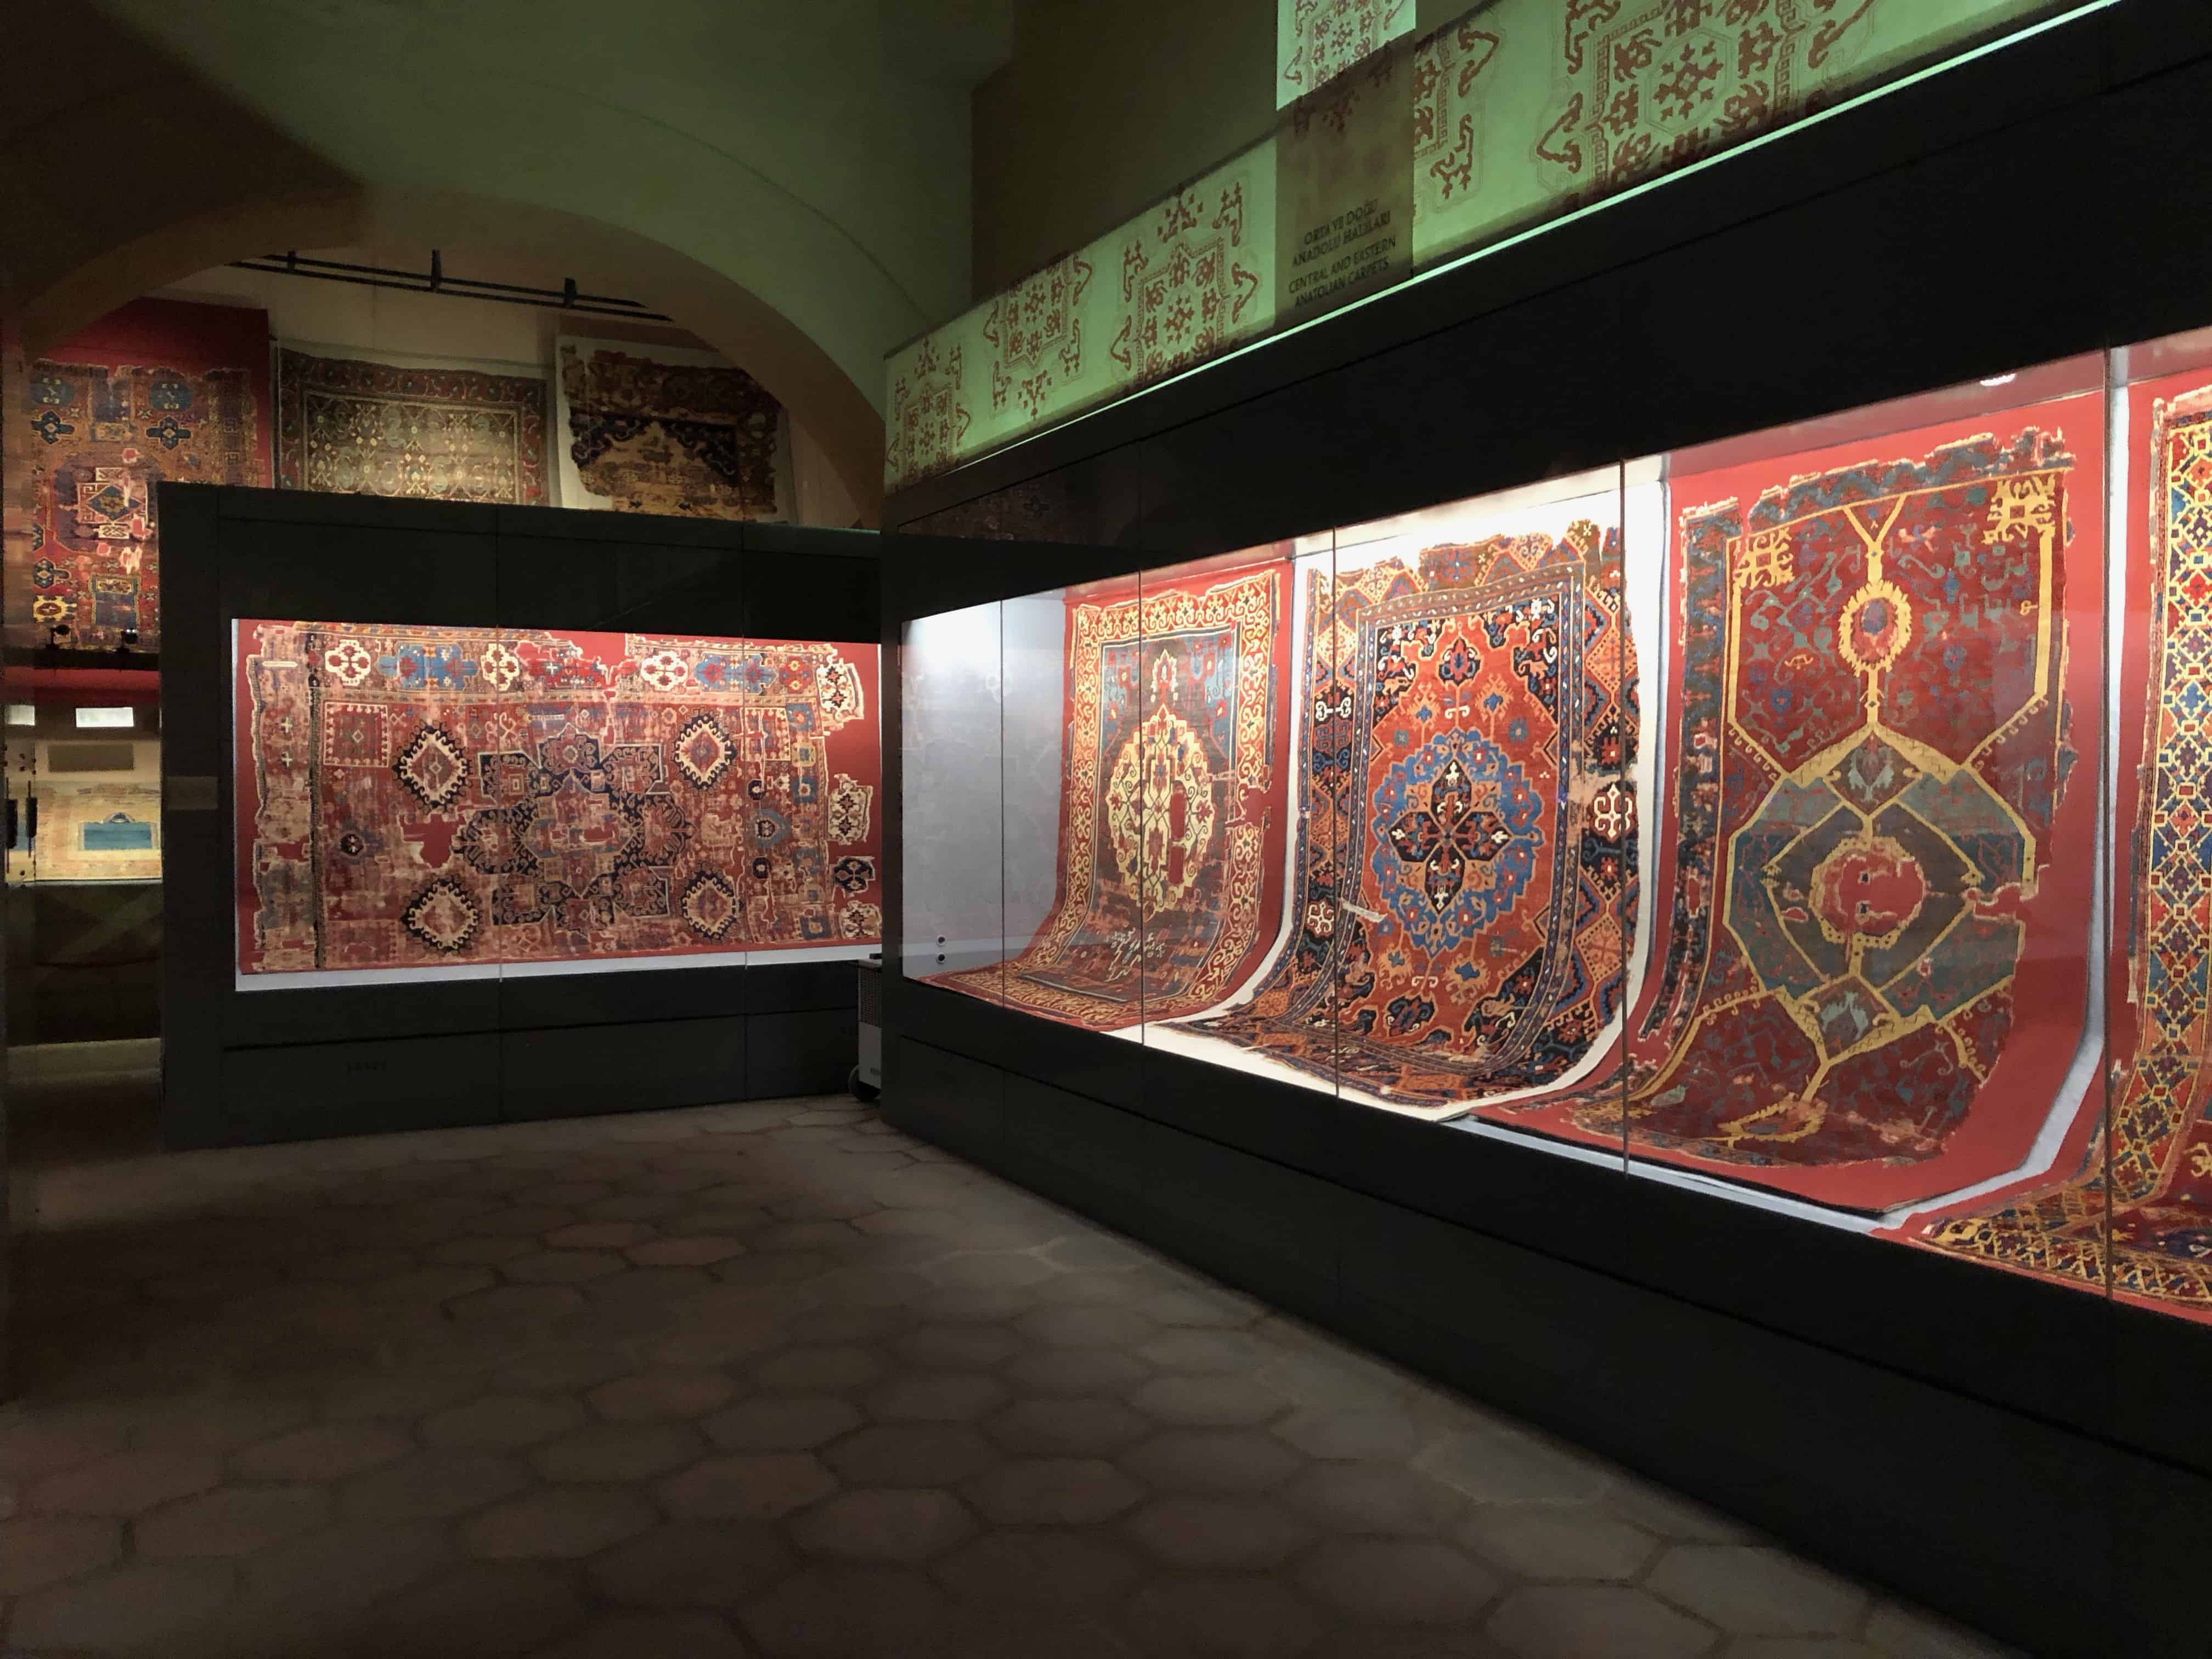 Second gallery at the Carpet Museum in Istanbul, Turkey